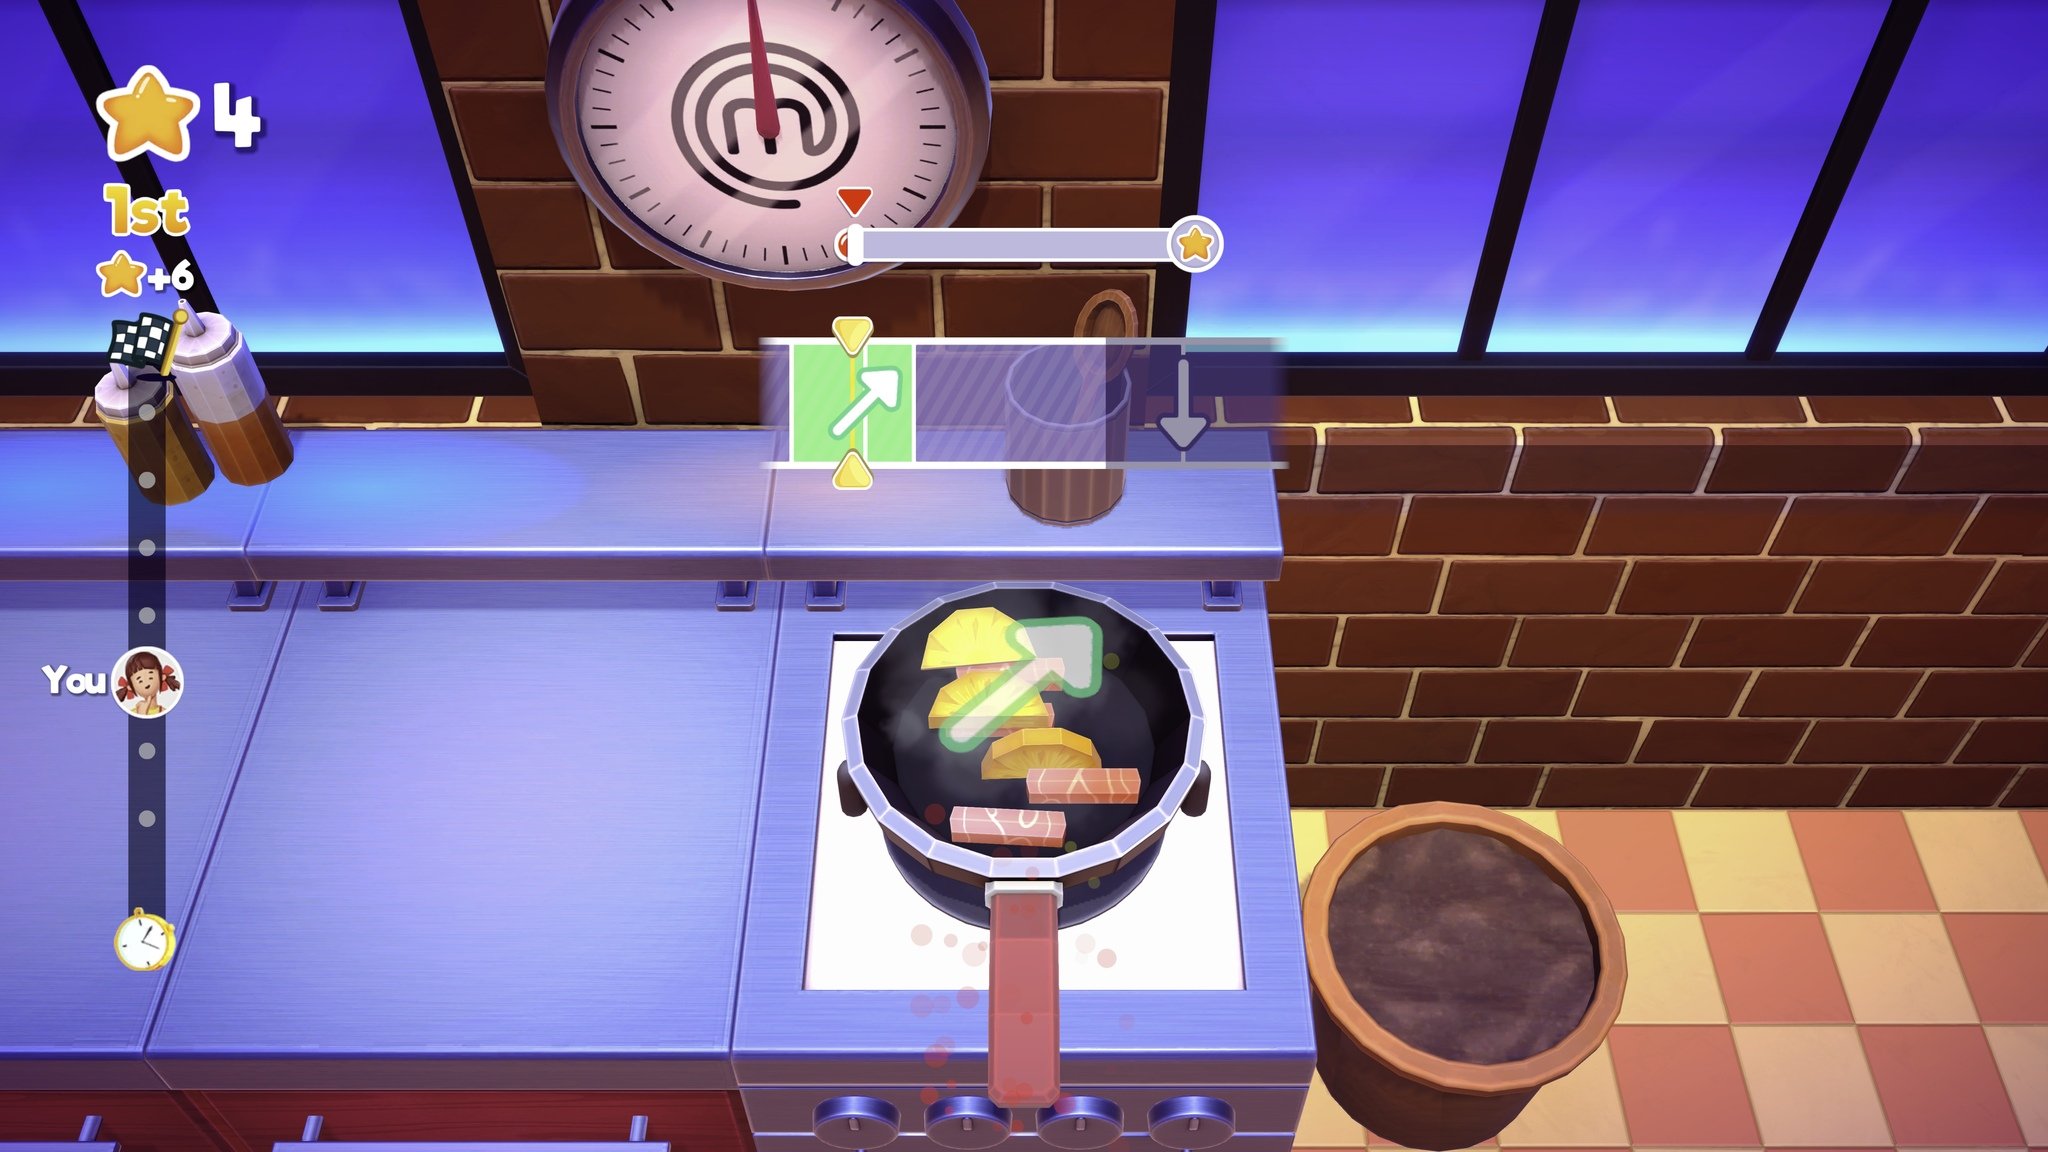 MasterChef: Let’s Cook! brings new weekly challenges to Apple Arcade